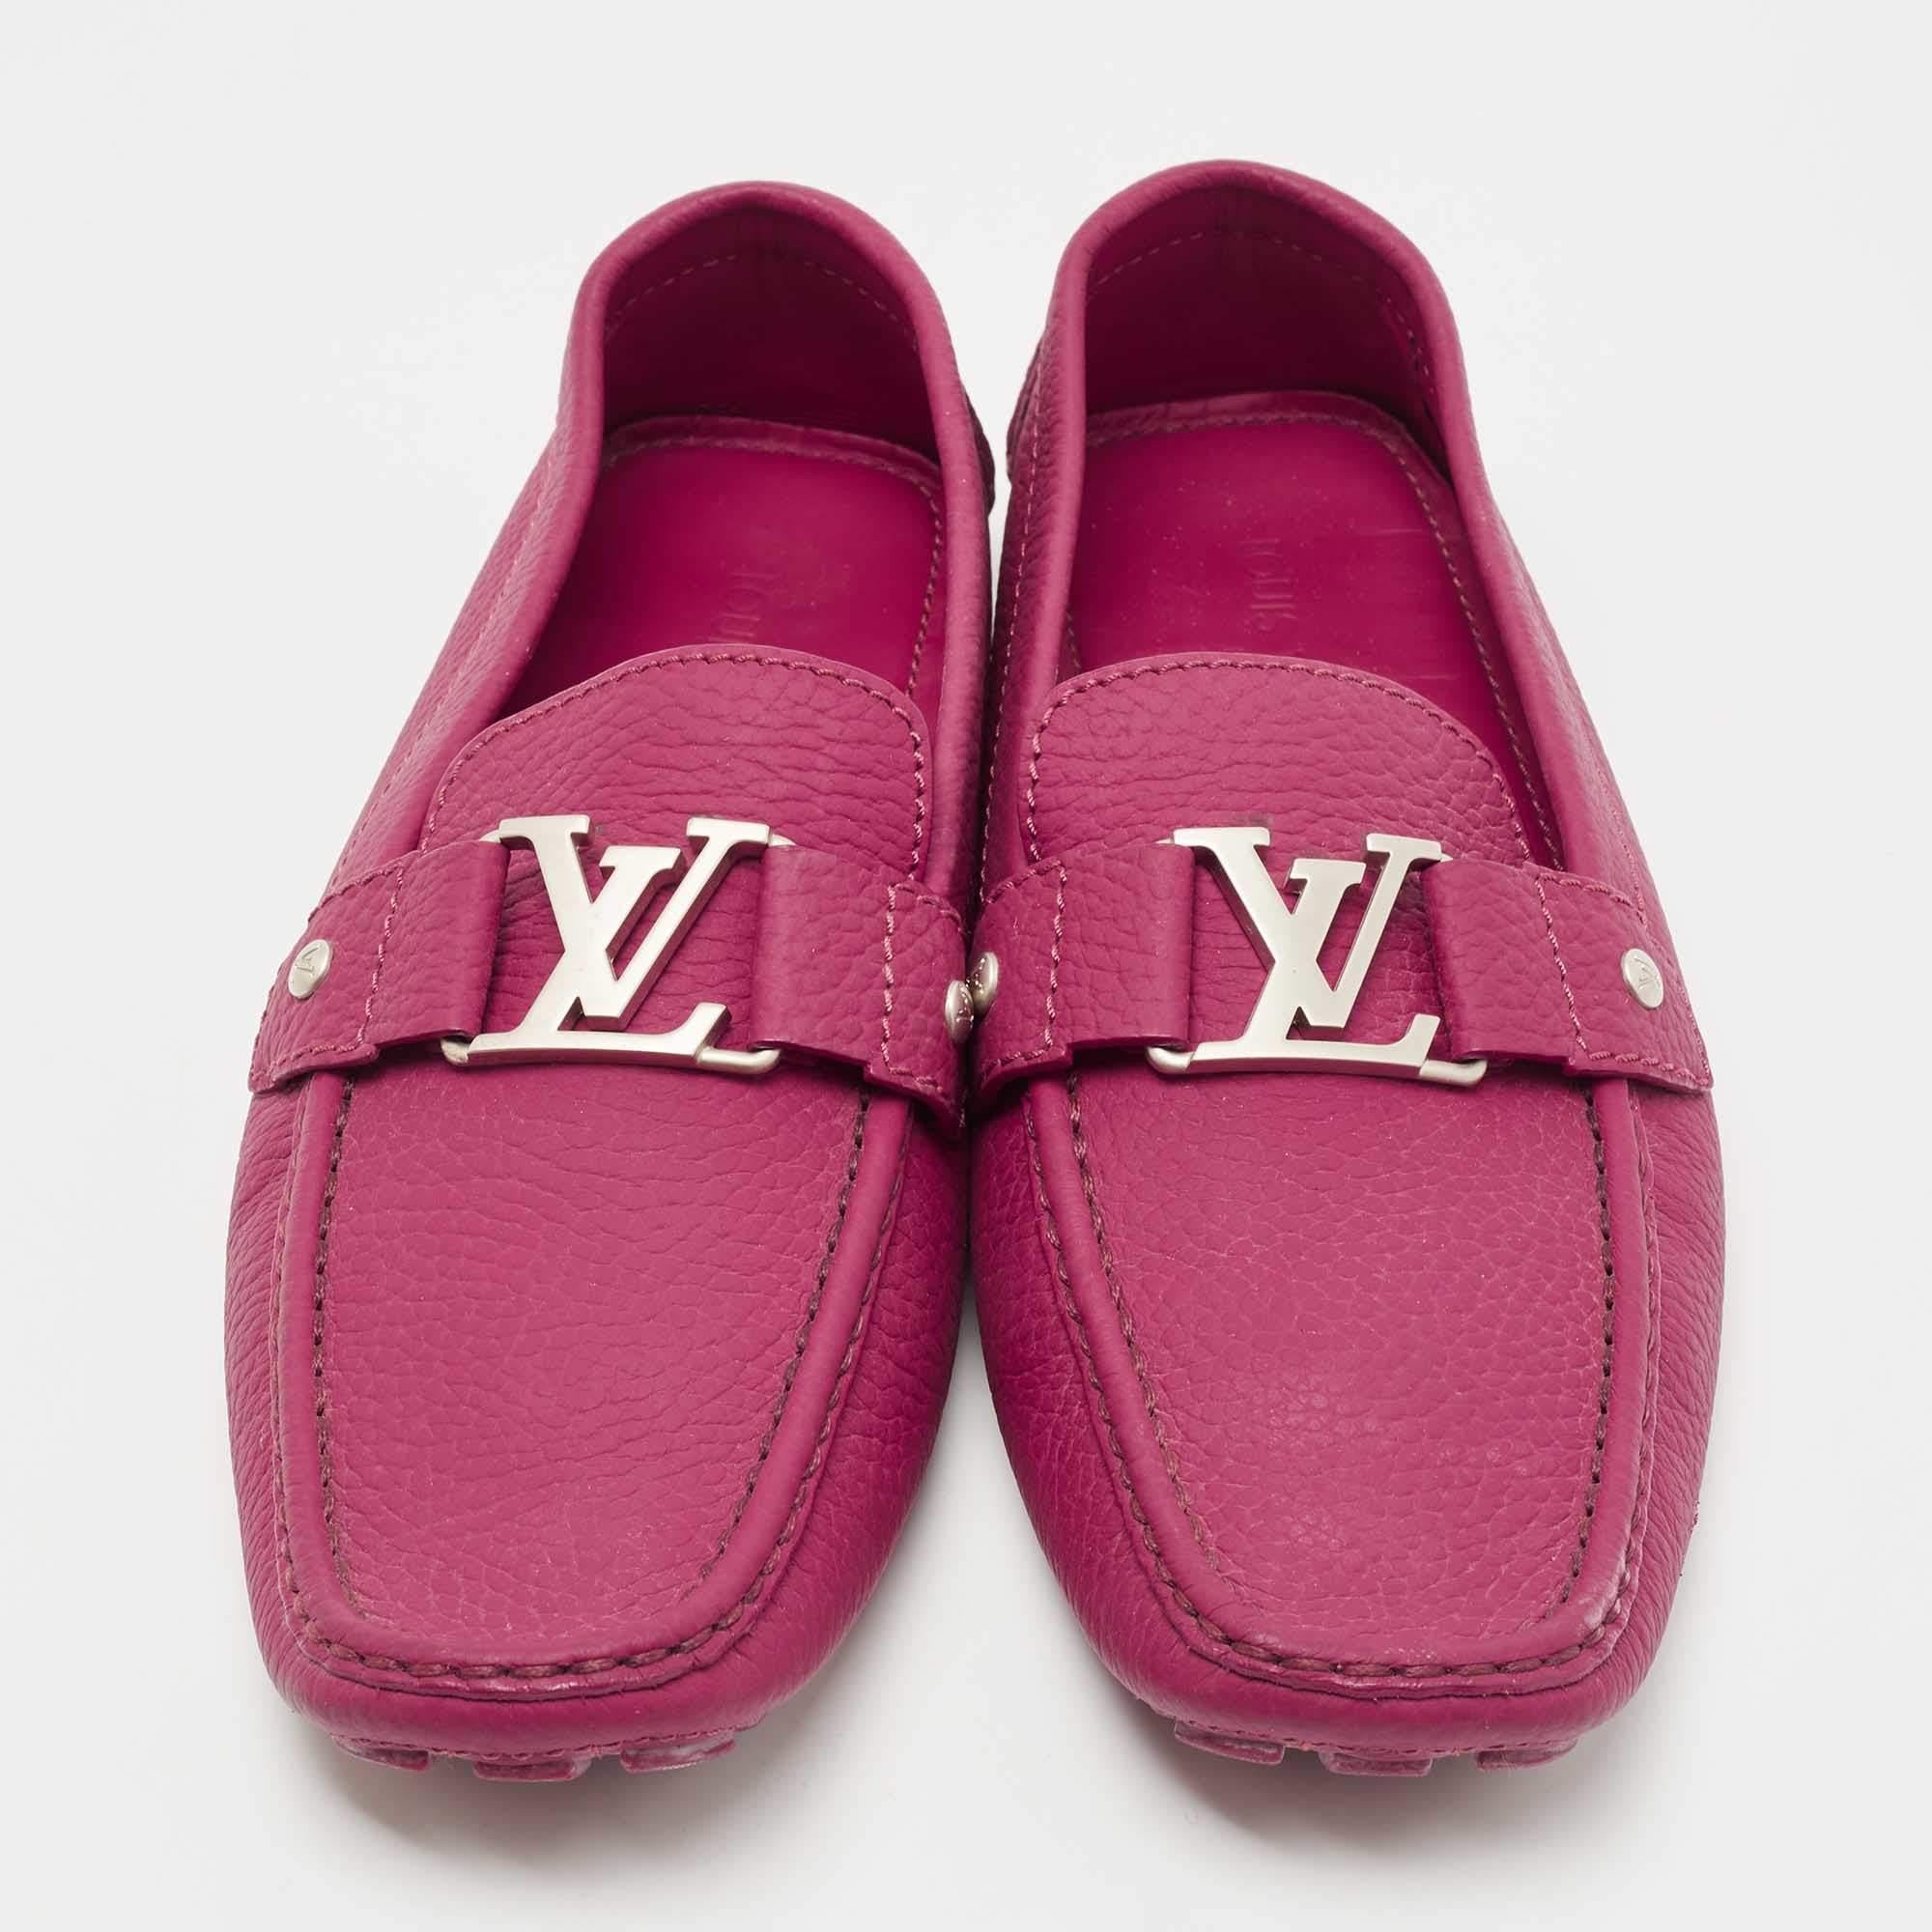 Let this comfortable pair be your first choice when you're out for a long day. These Louis Vuitton loafers have well-sewn uppers beautifully set on durable soles.

